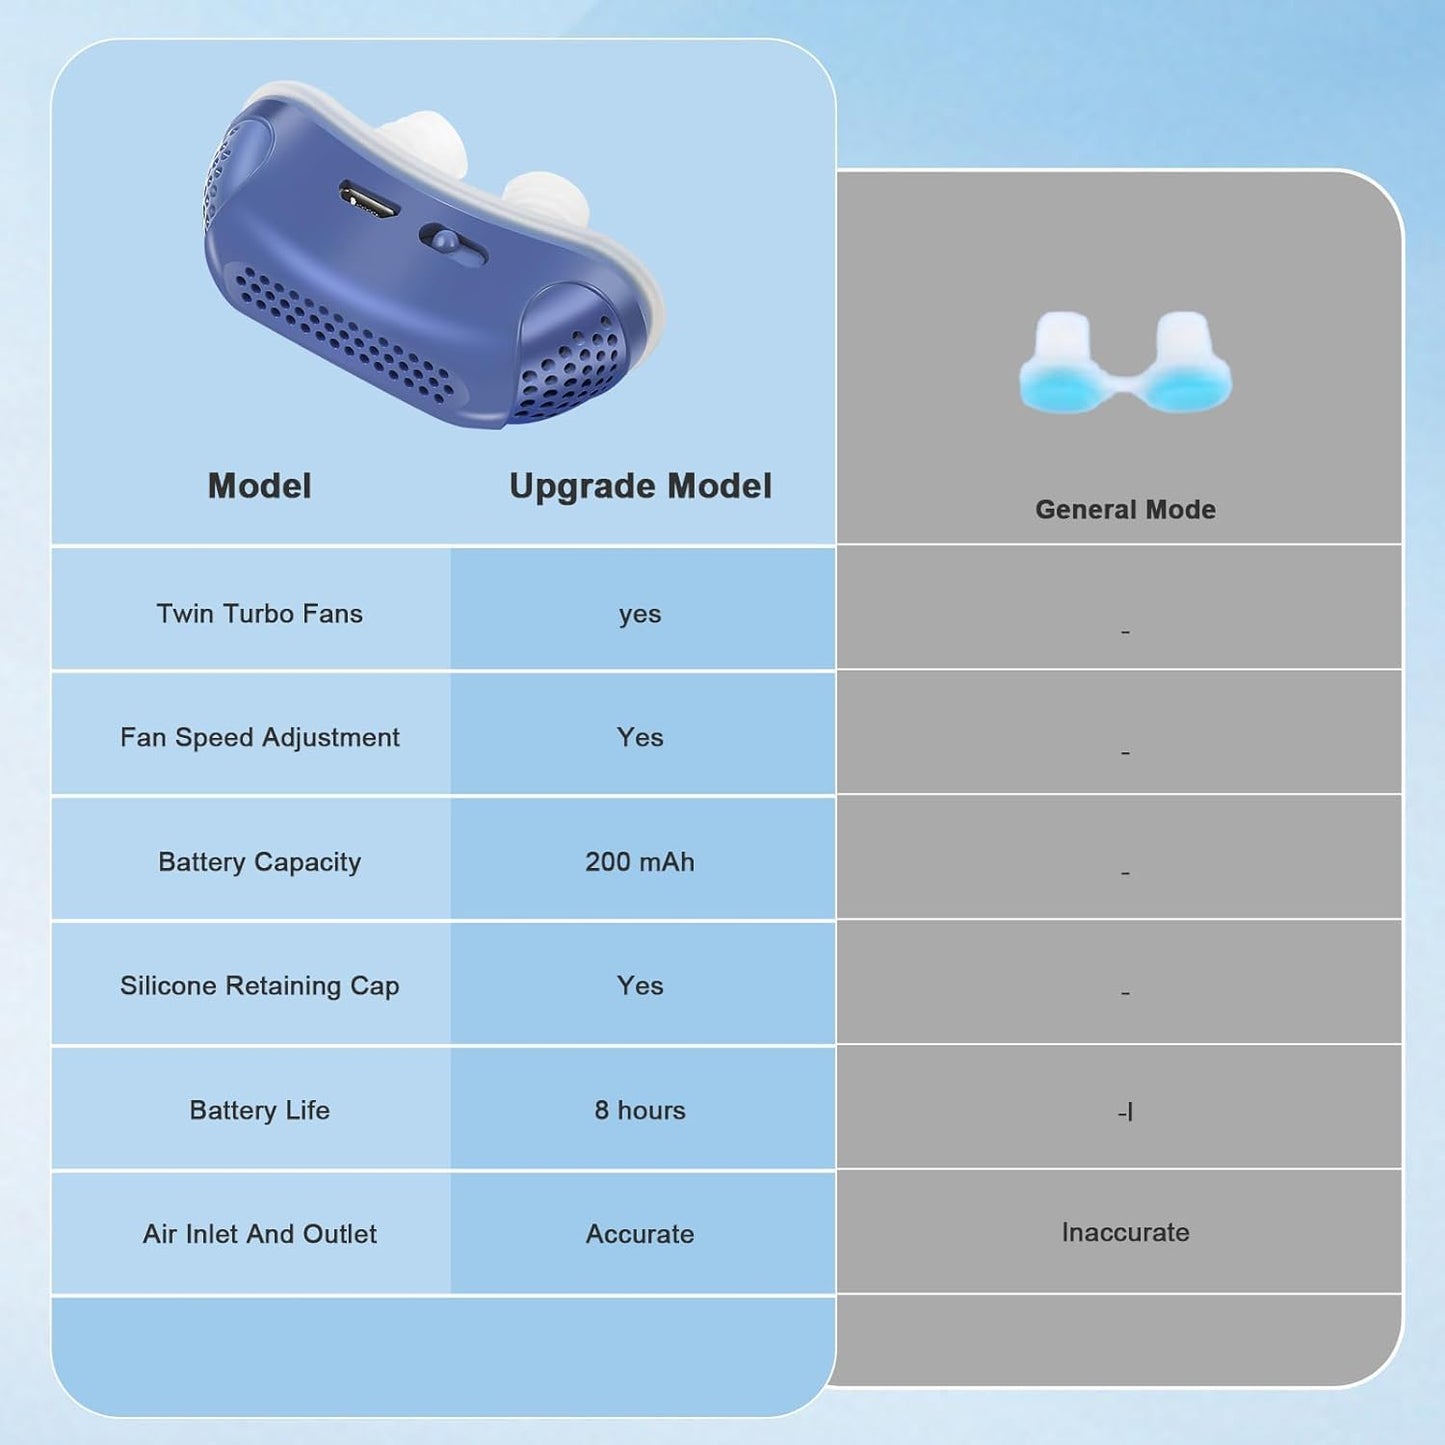 Anti Snoring Devices,Double Vortex Anti Snoring Device, Suitable for All Nose Shapes